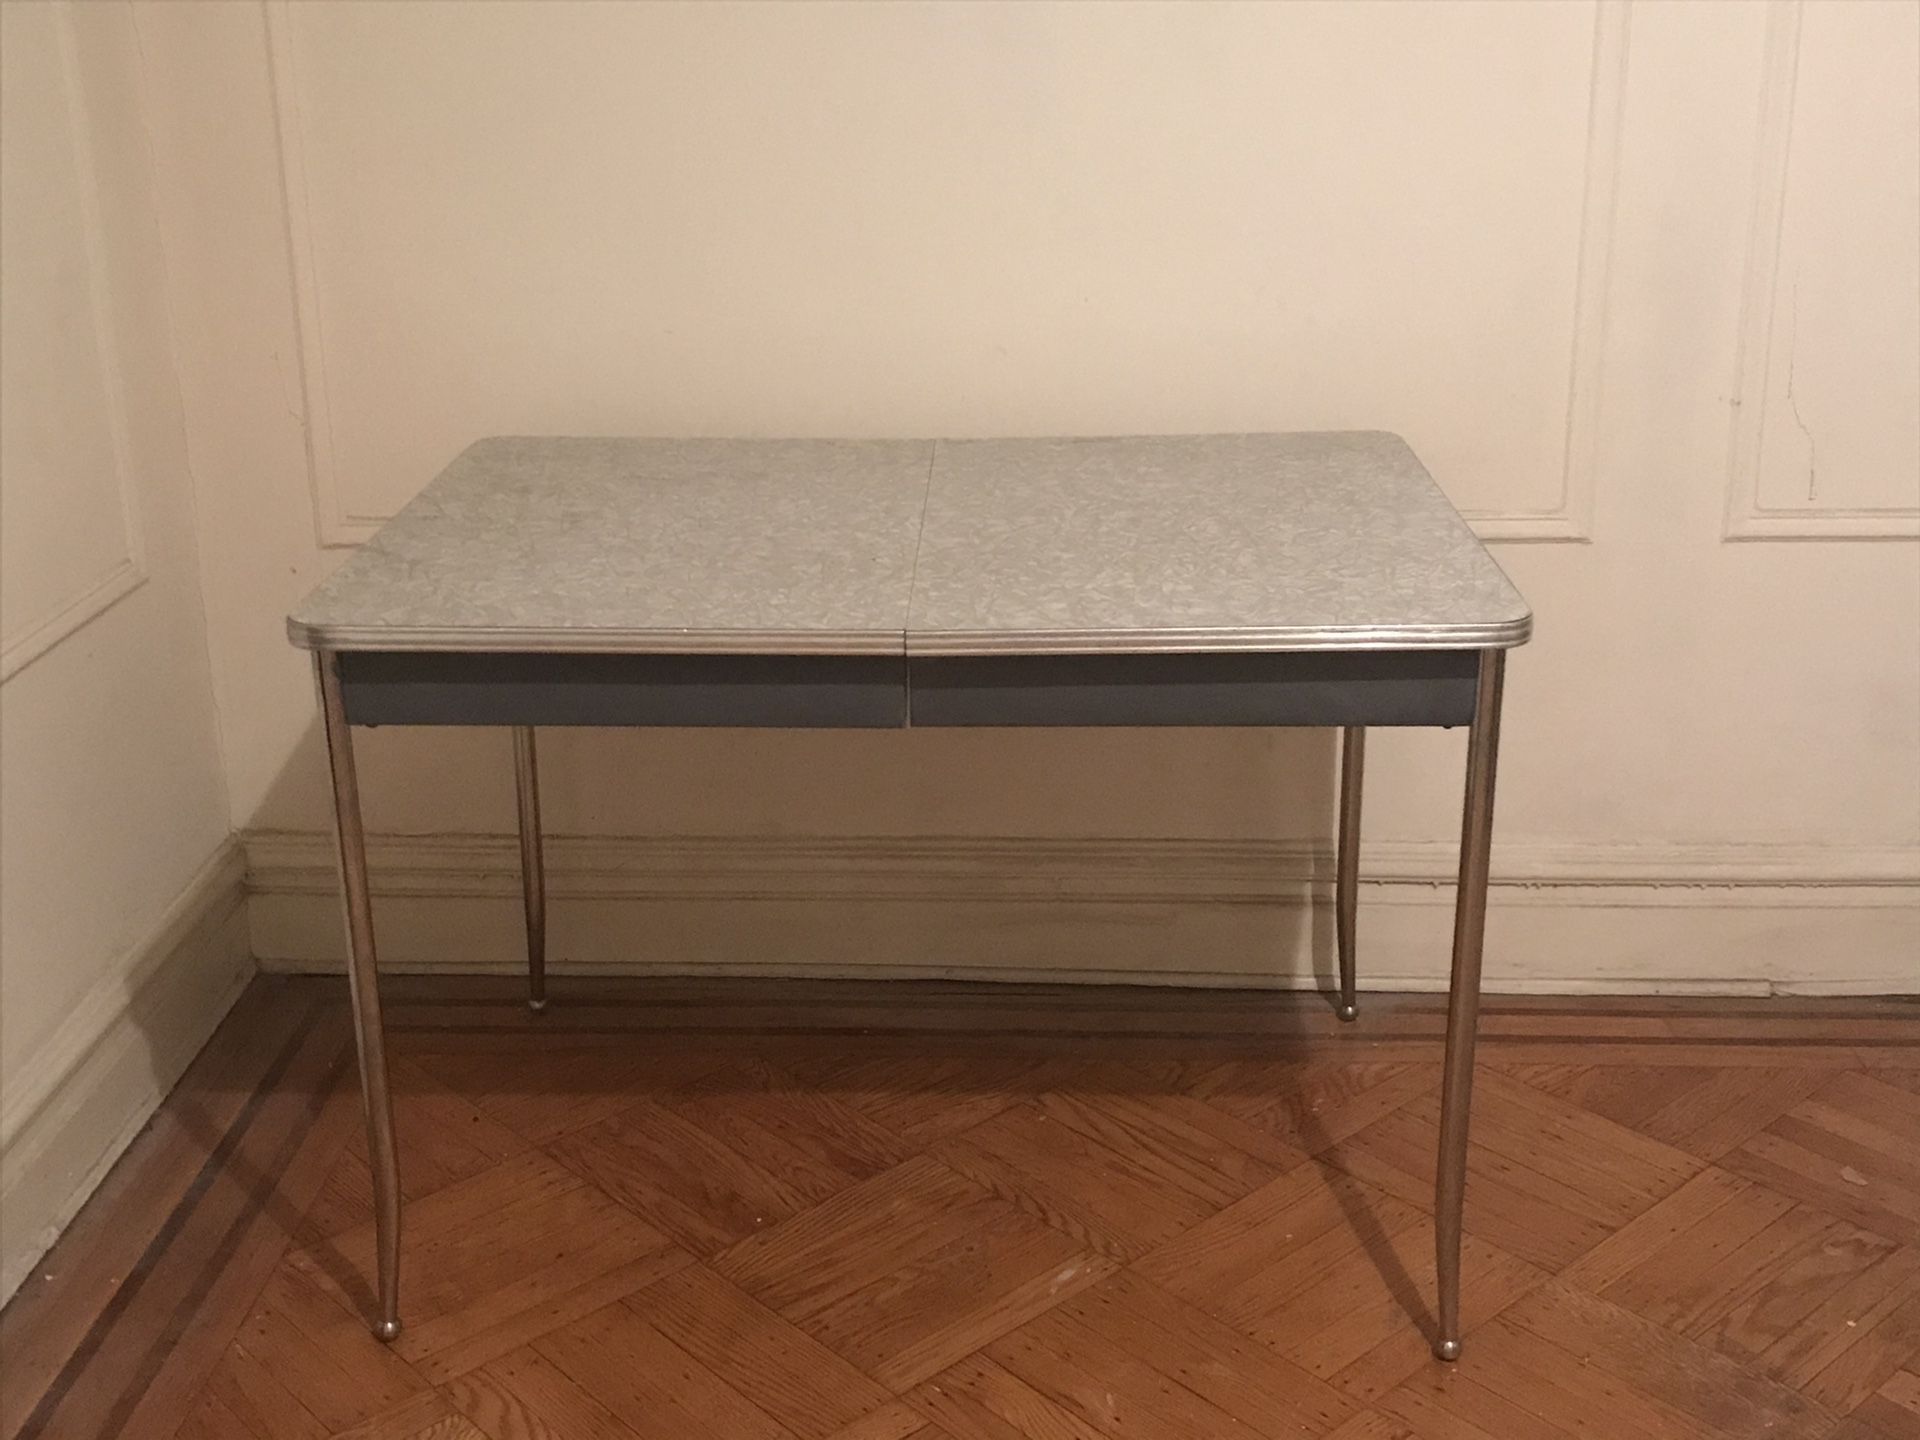 Vintage formica kitchen table with chrome trim